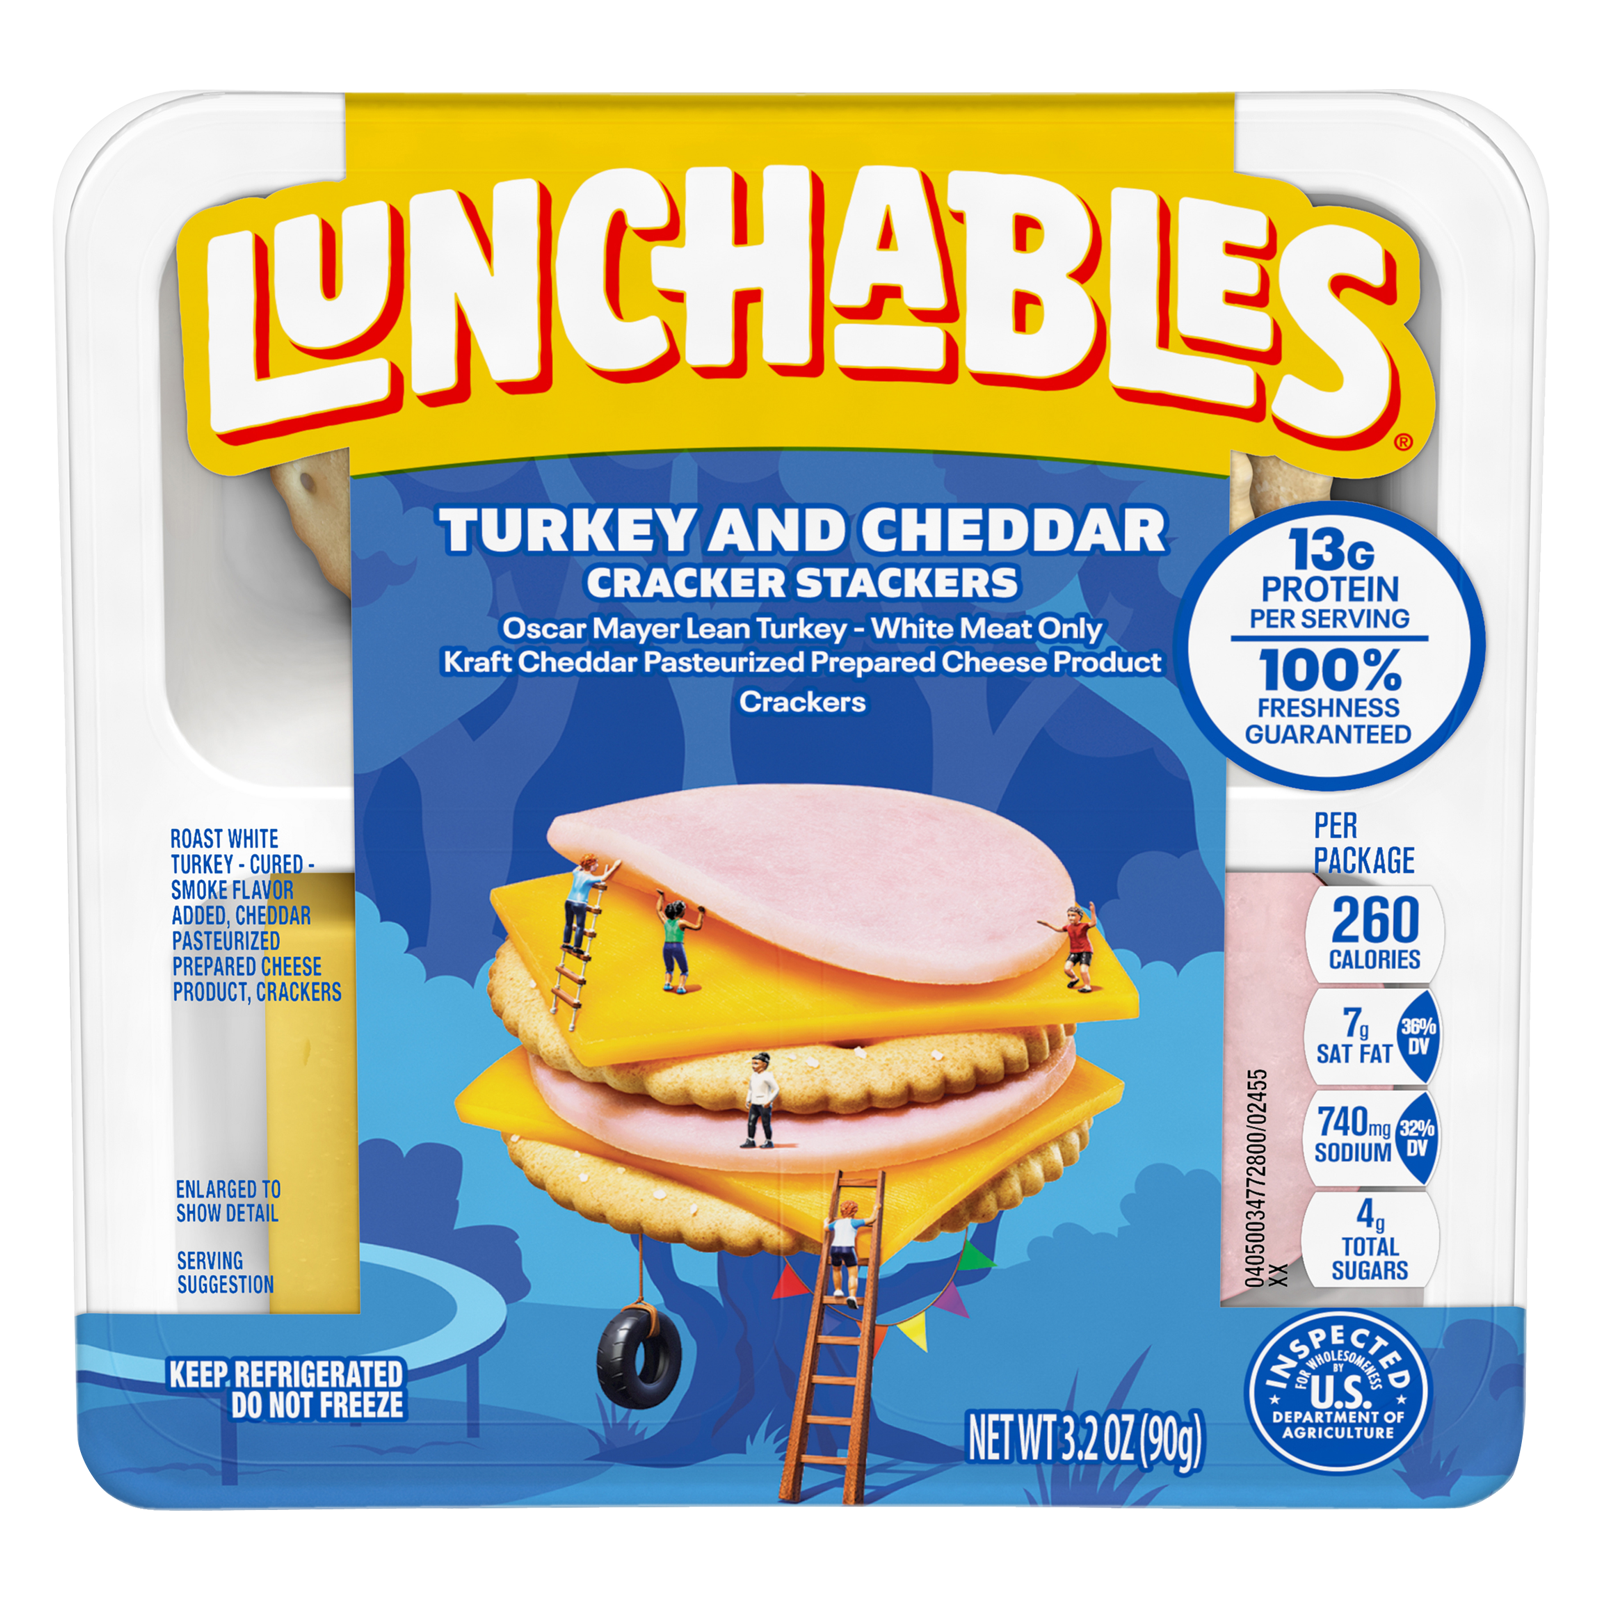 Lunchables Turkey & Cheddar with Crackers - 3.2oz